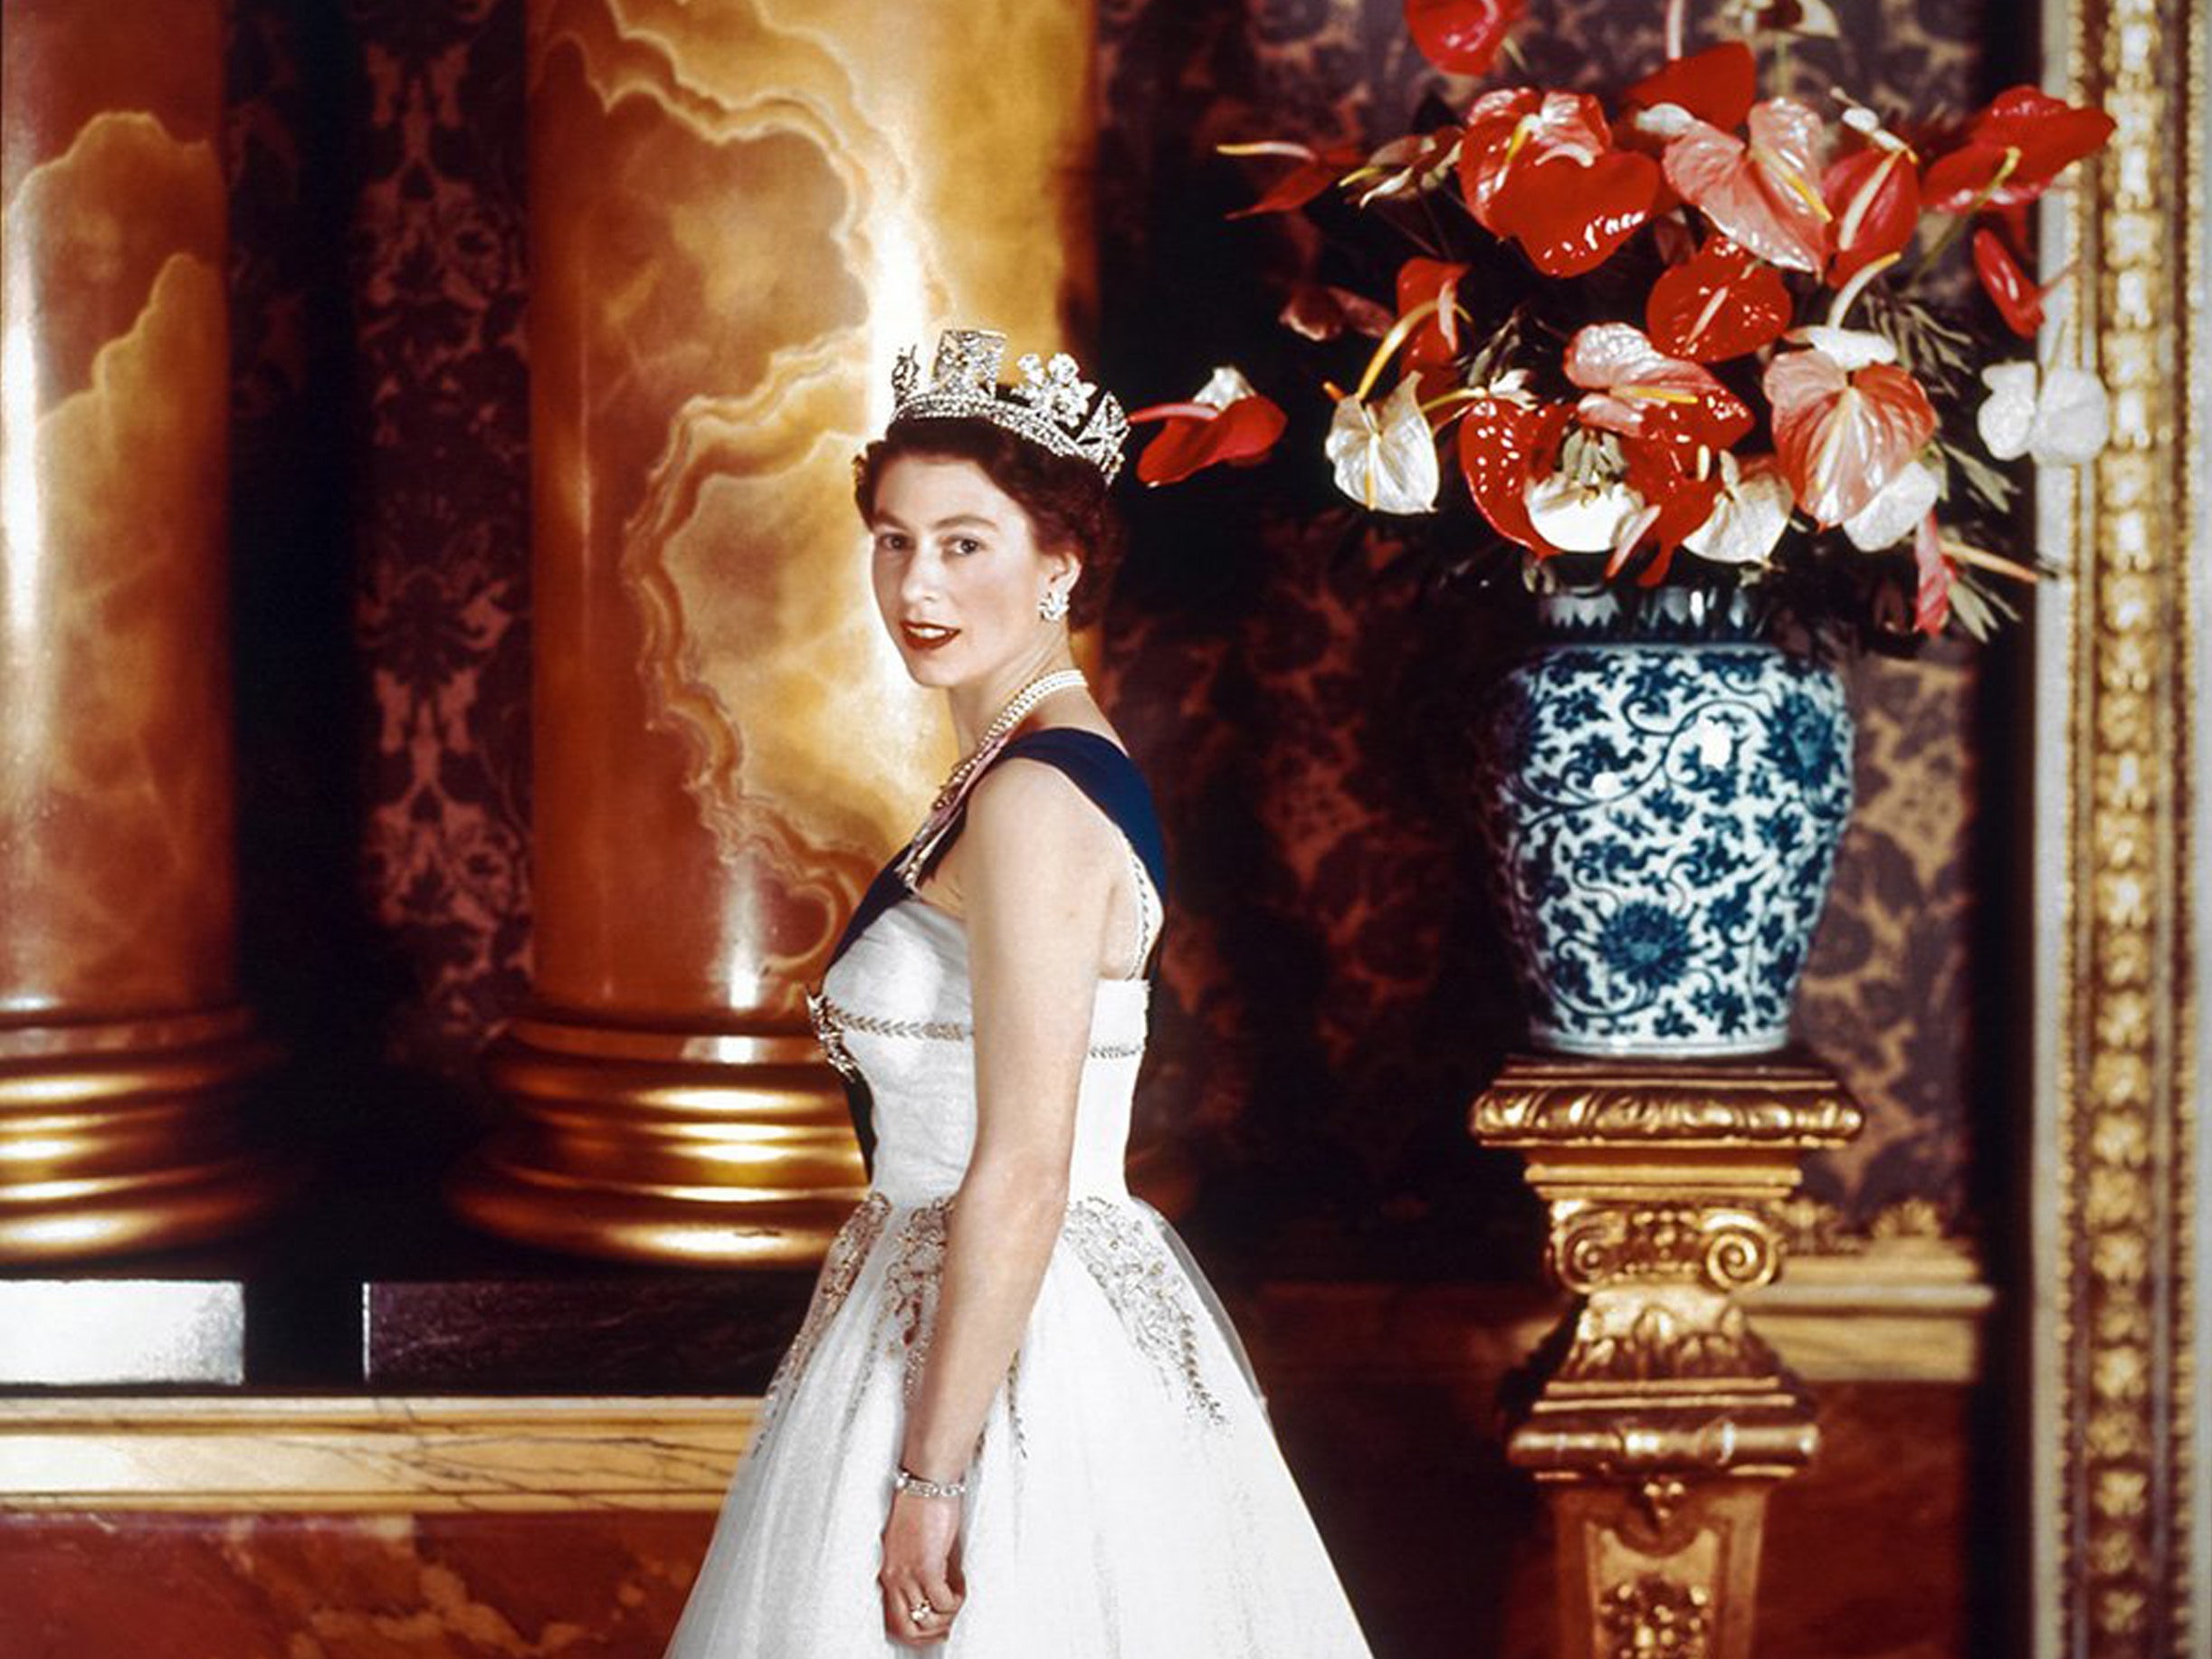 10 Interesting Facts About Queen Elizabeth II Which You Might Not Know